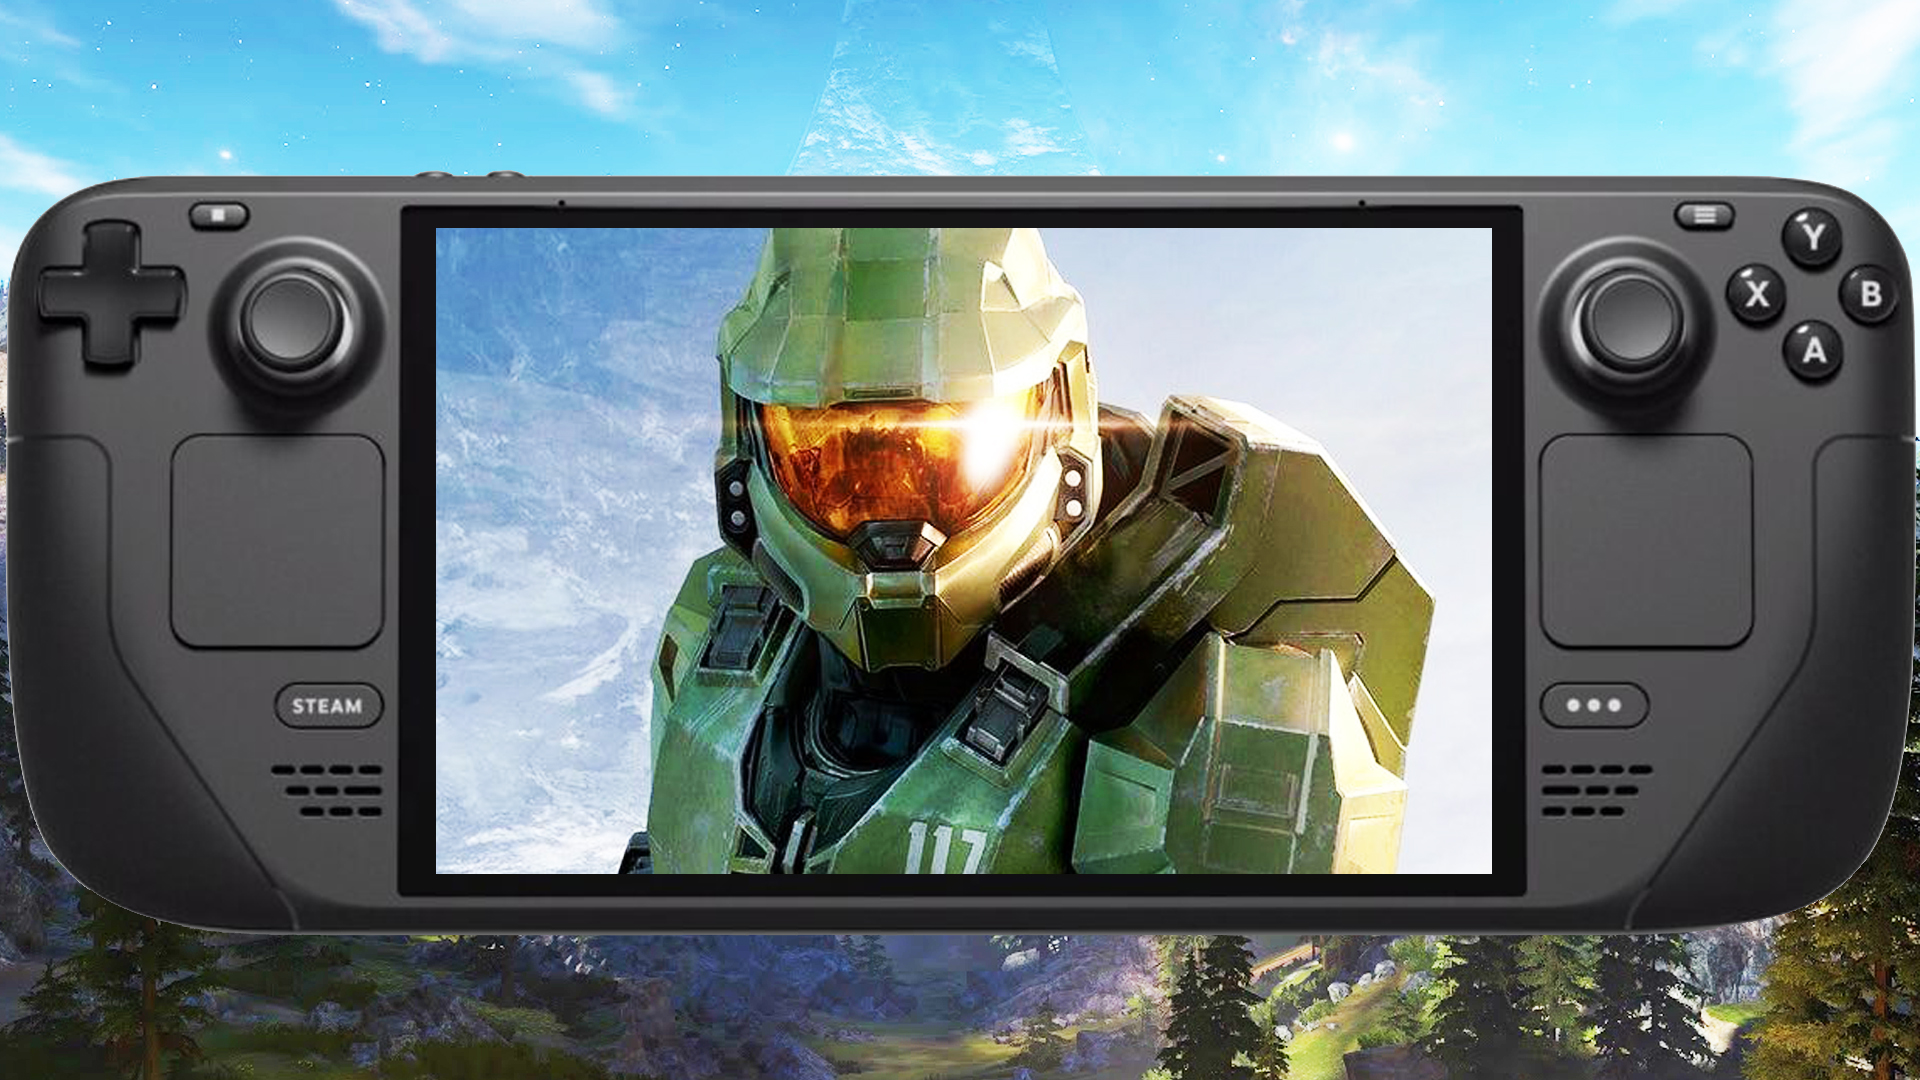 Here's how to get Halo Infinite Steam Deck working